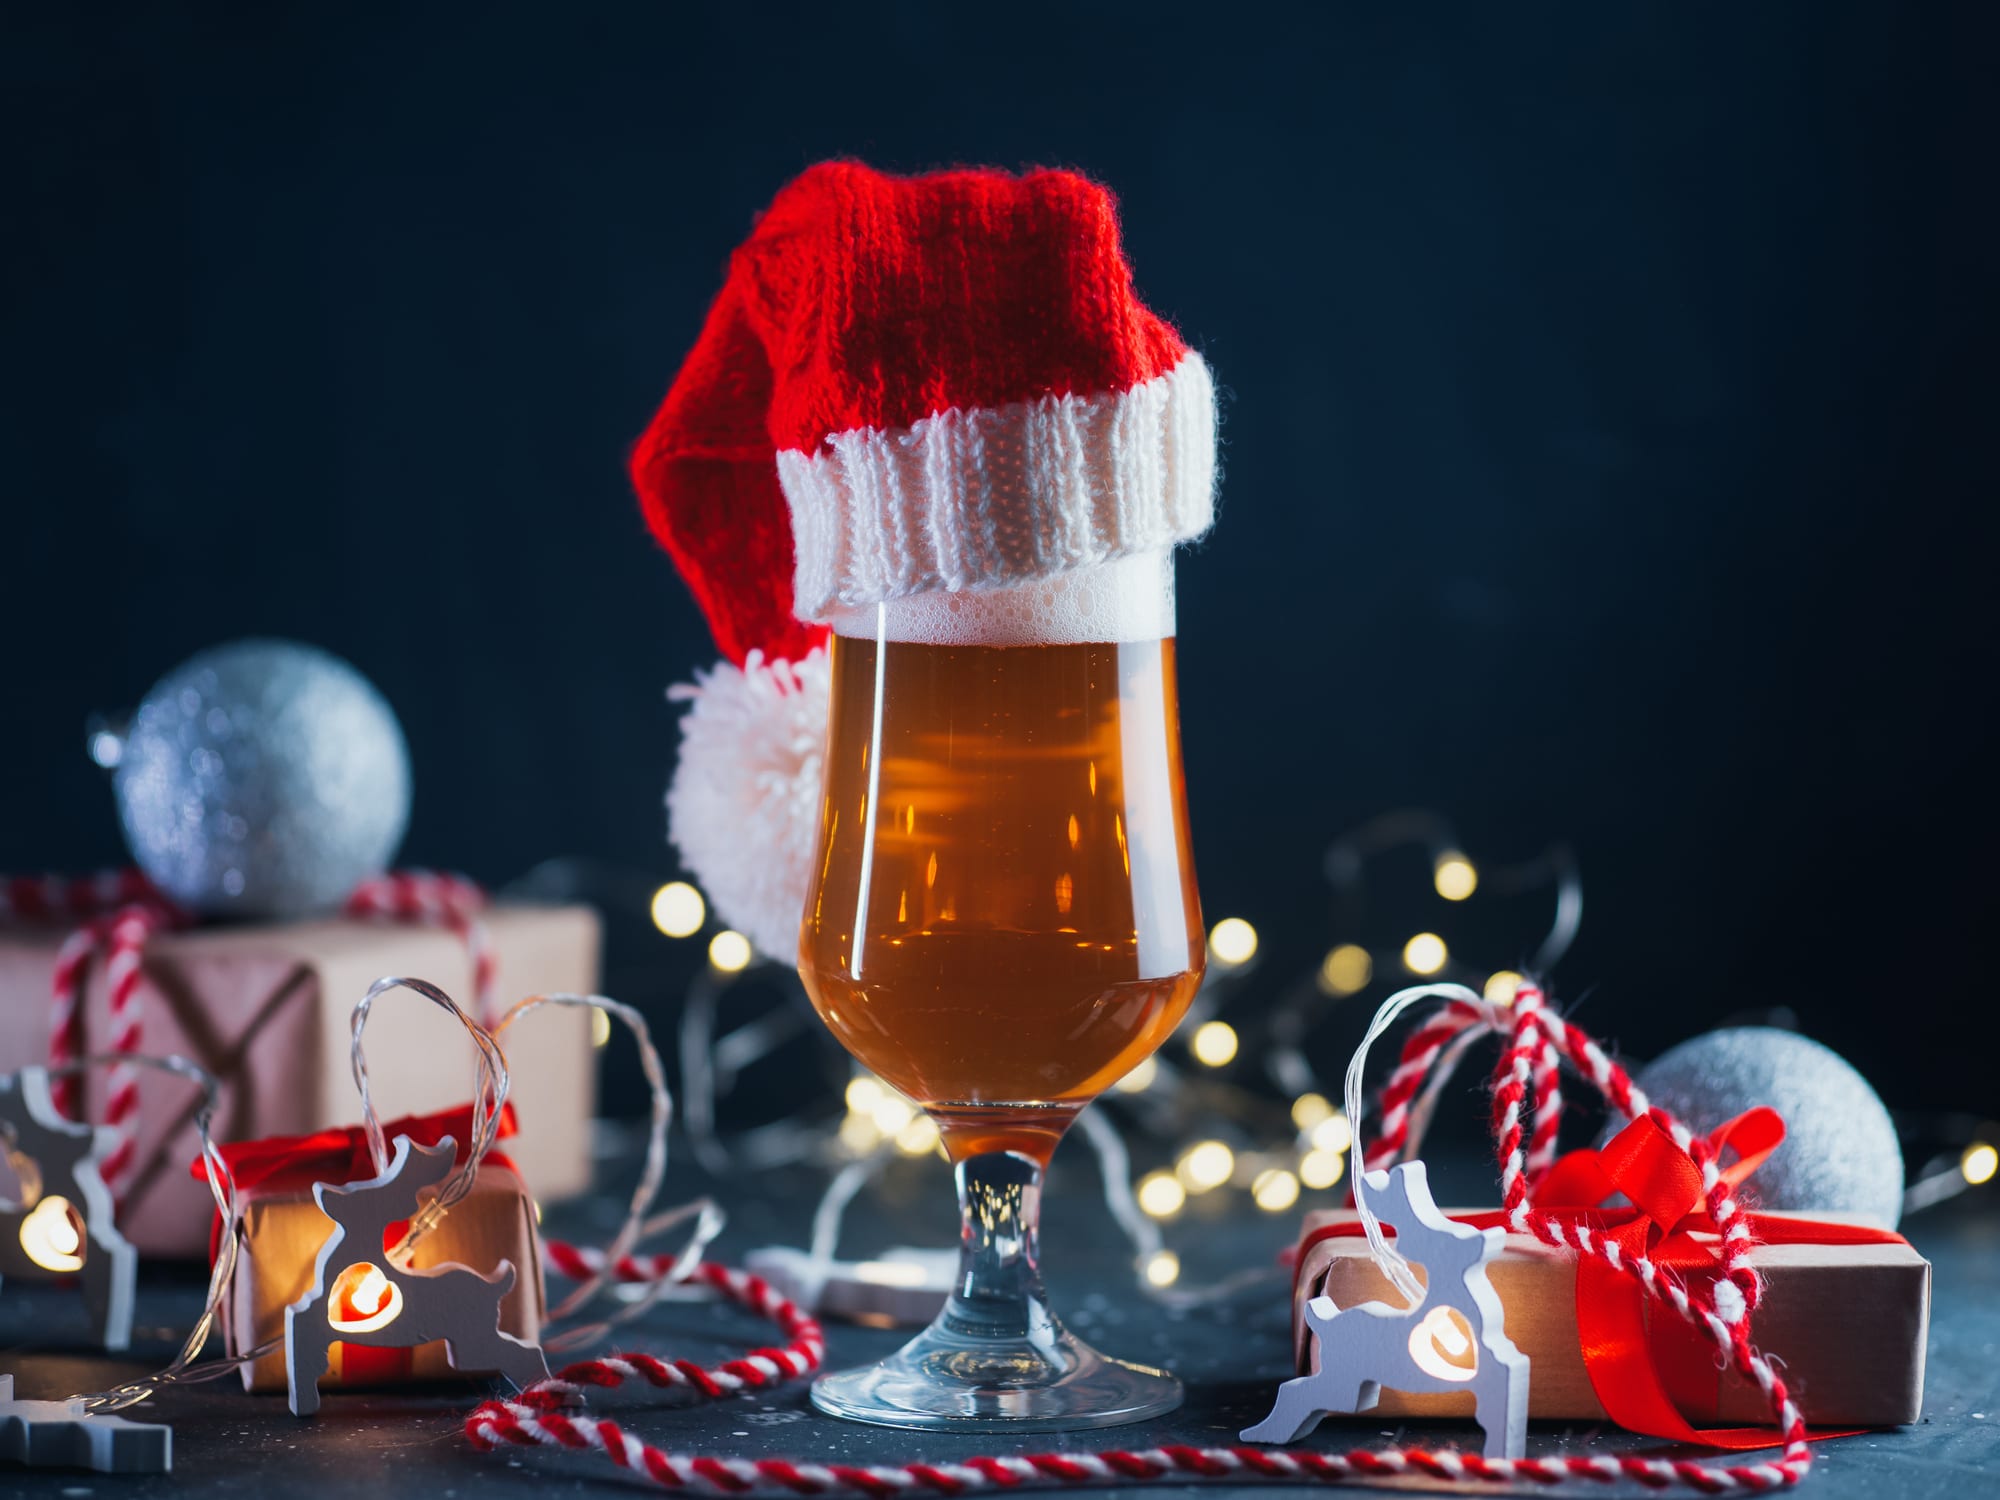 A tall glass of light beer in a Santa Claus hat on the holiday table. Party greeting card